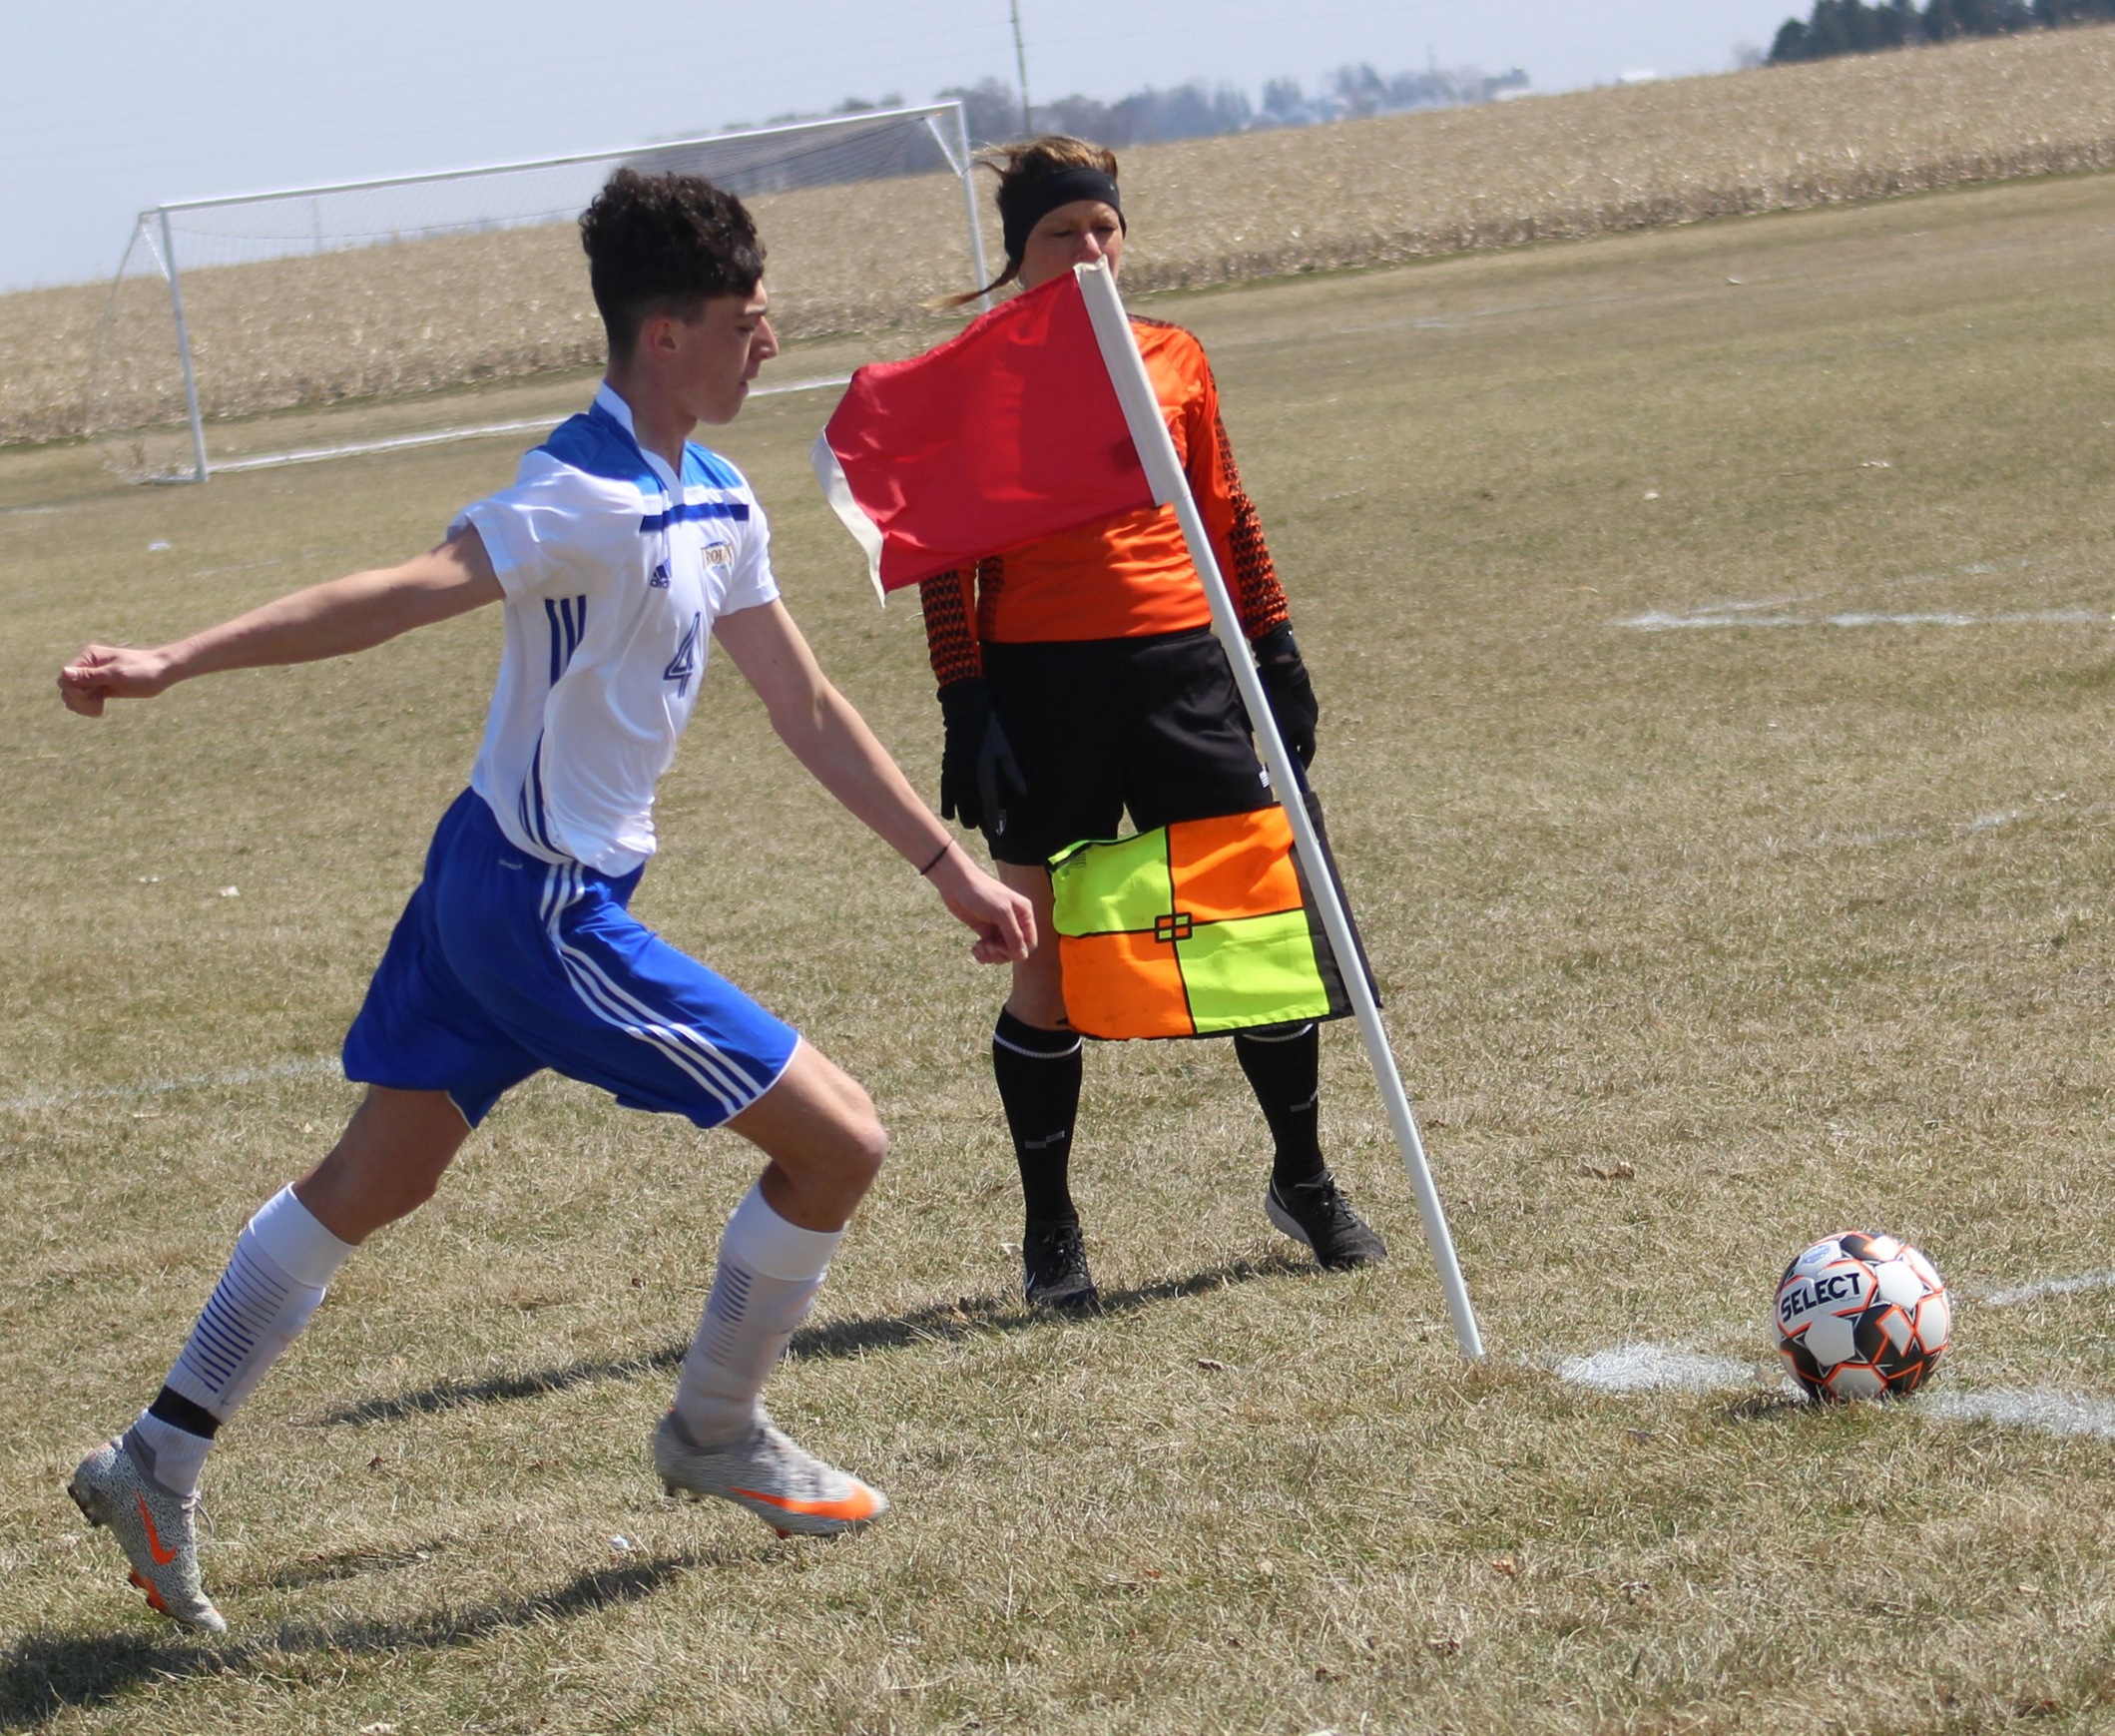 NIACC's Lewis Bowes takes a corner kick in first half of Friday's soccer match against Marshalltown CC.